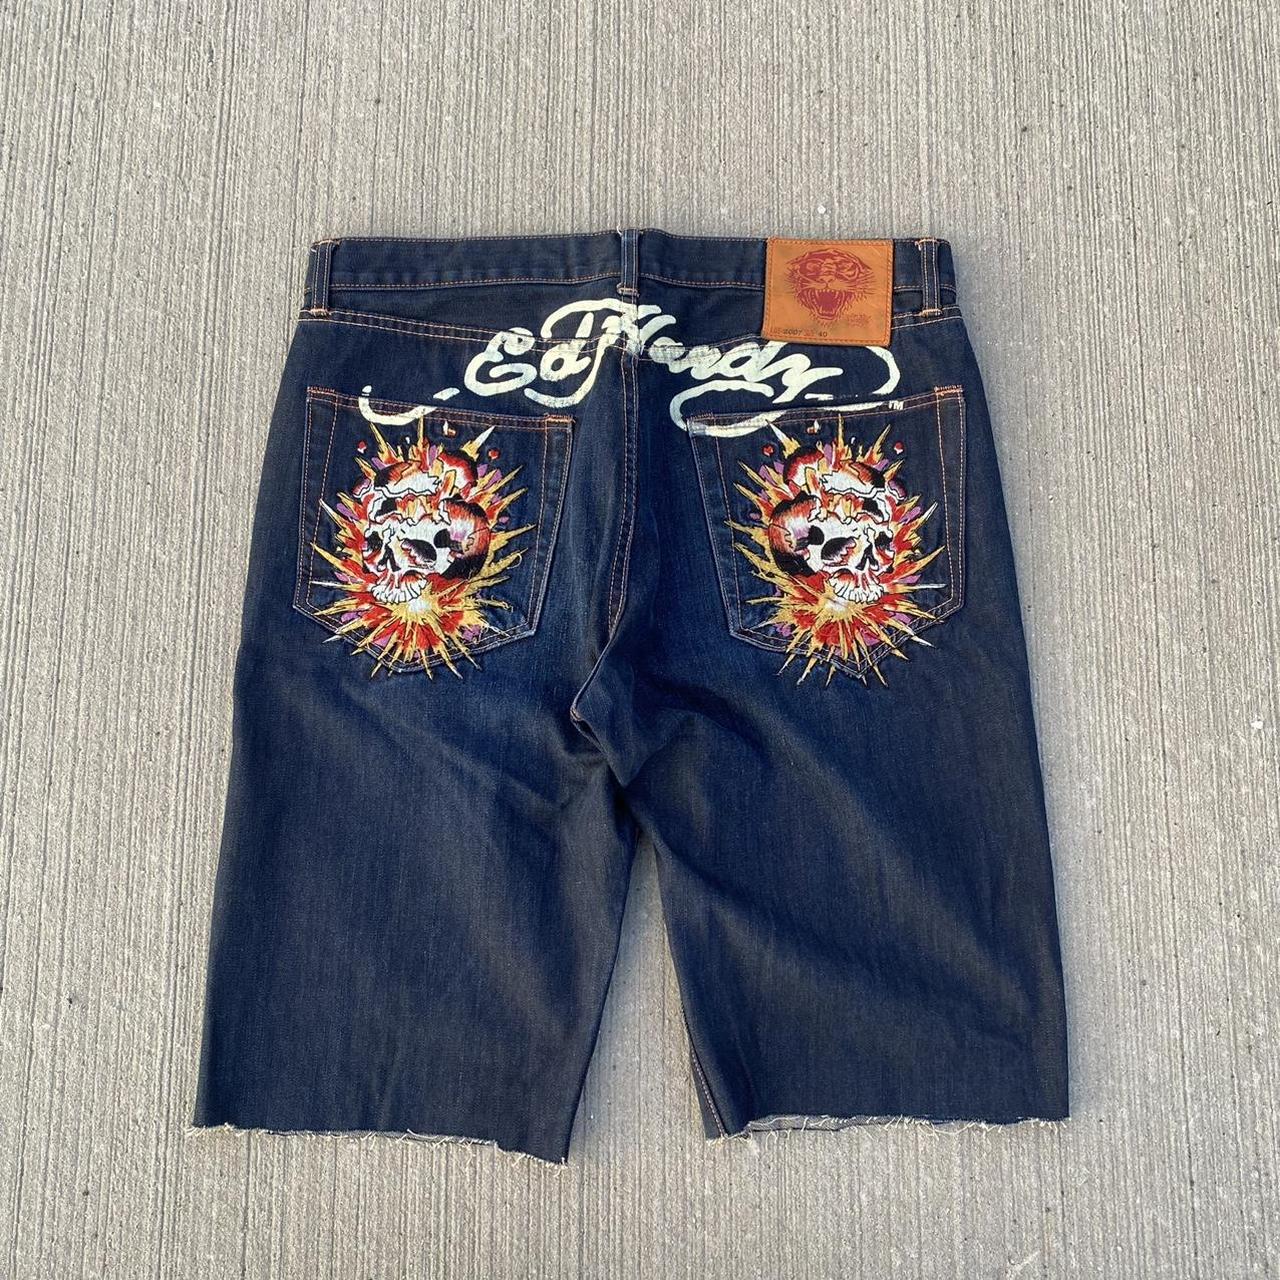 Baggy Ed Hardy Jorts Y2K Embroidered Shorts Cut Off... - Depop